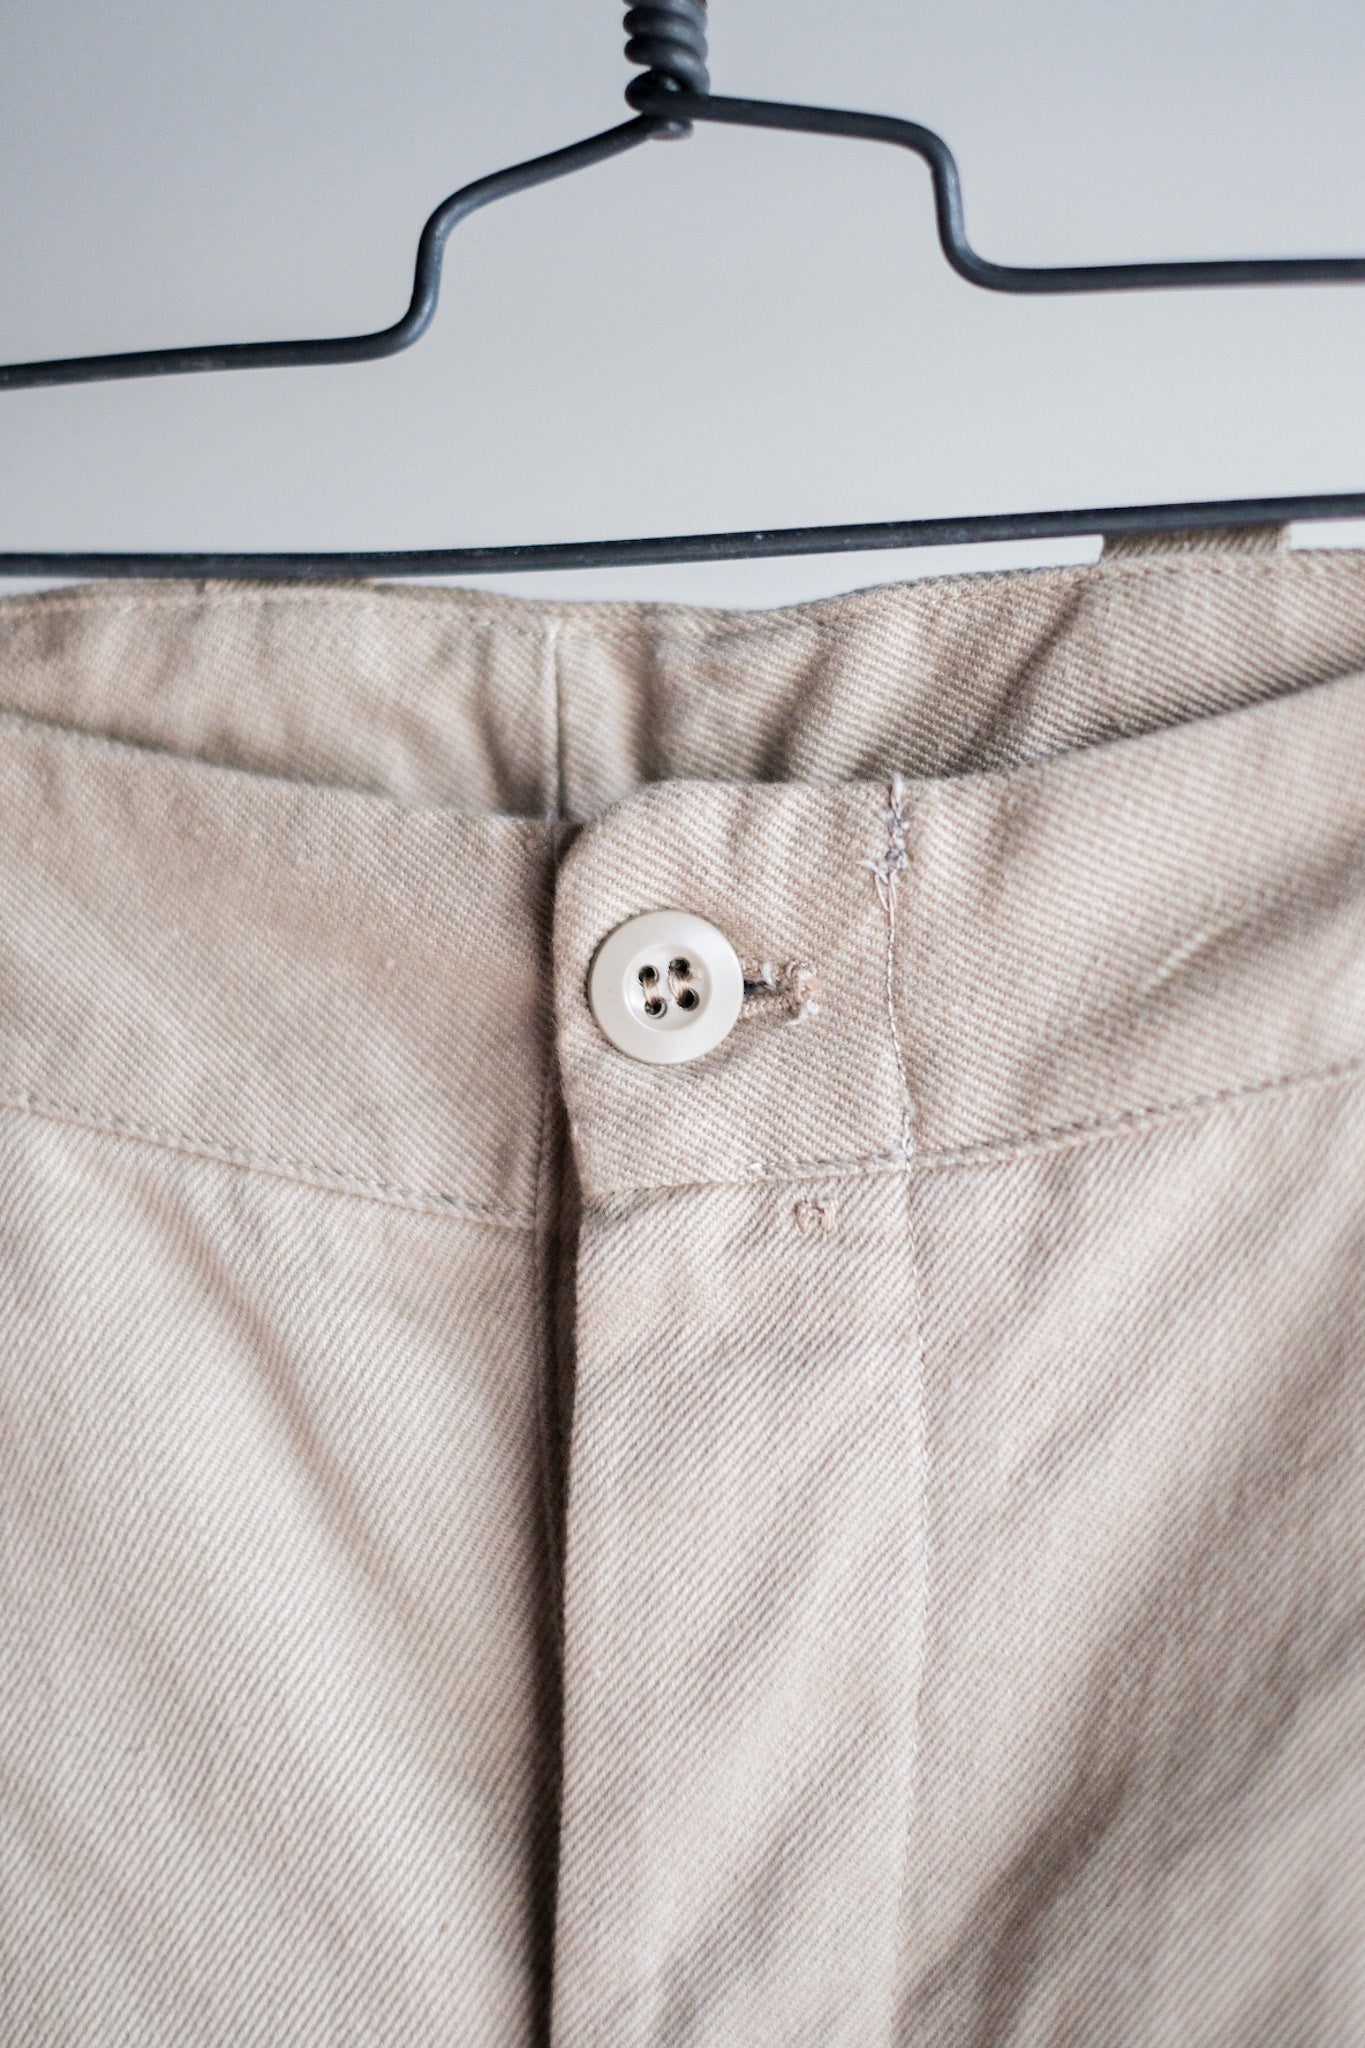 [~ 60's] French Army M52 CHINO TROUSERS SIZE.16 "Dead Stock"